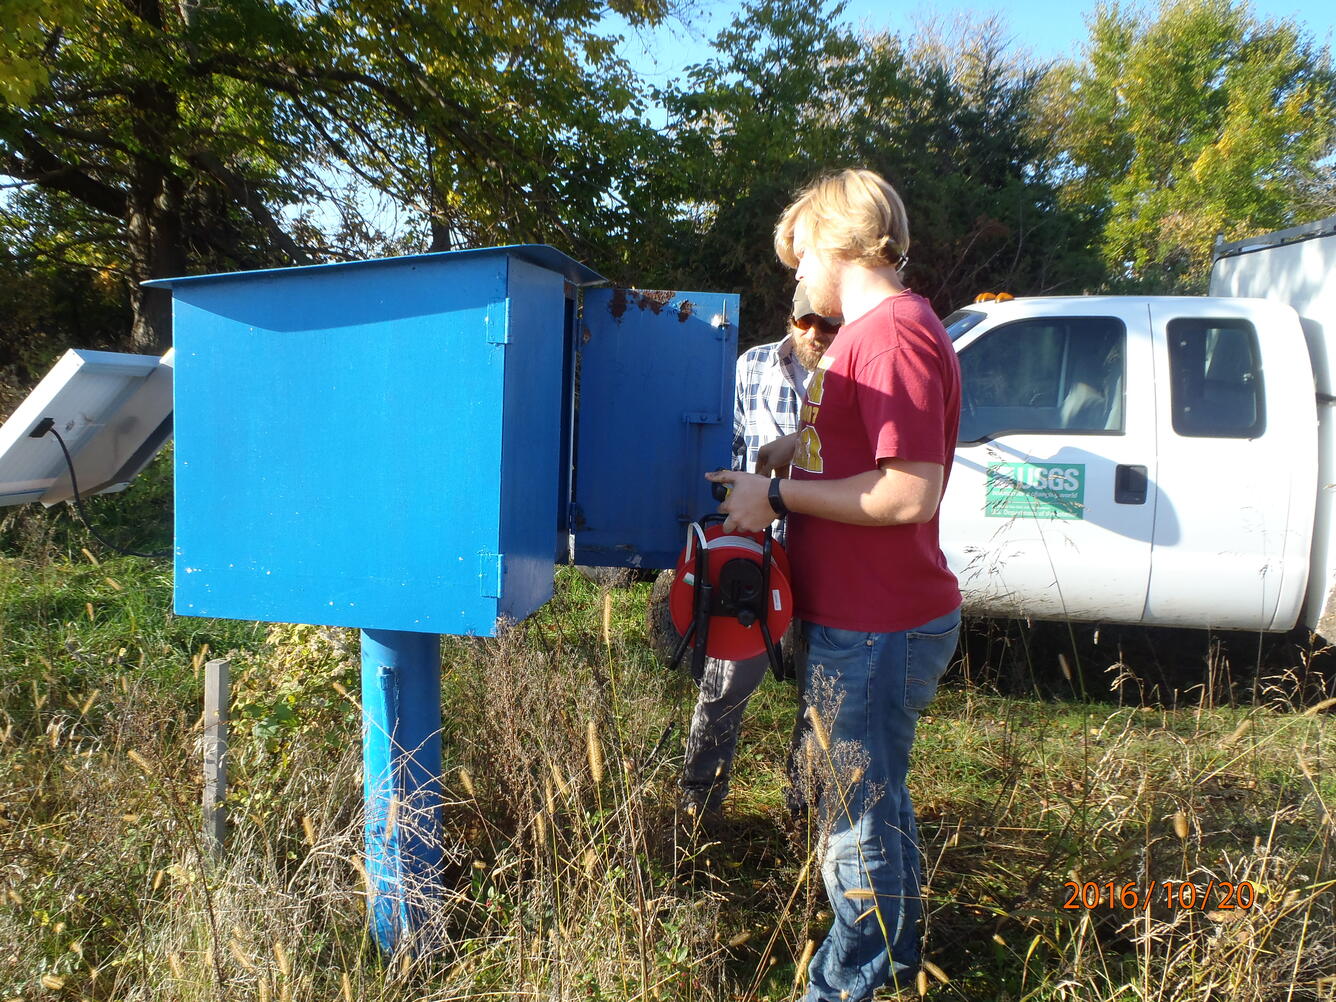 USGS scientists collecting samples from City of Lincoln groundwater monitoring well